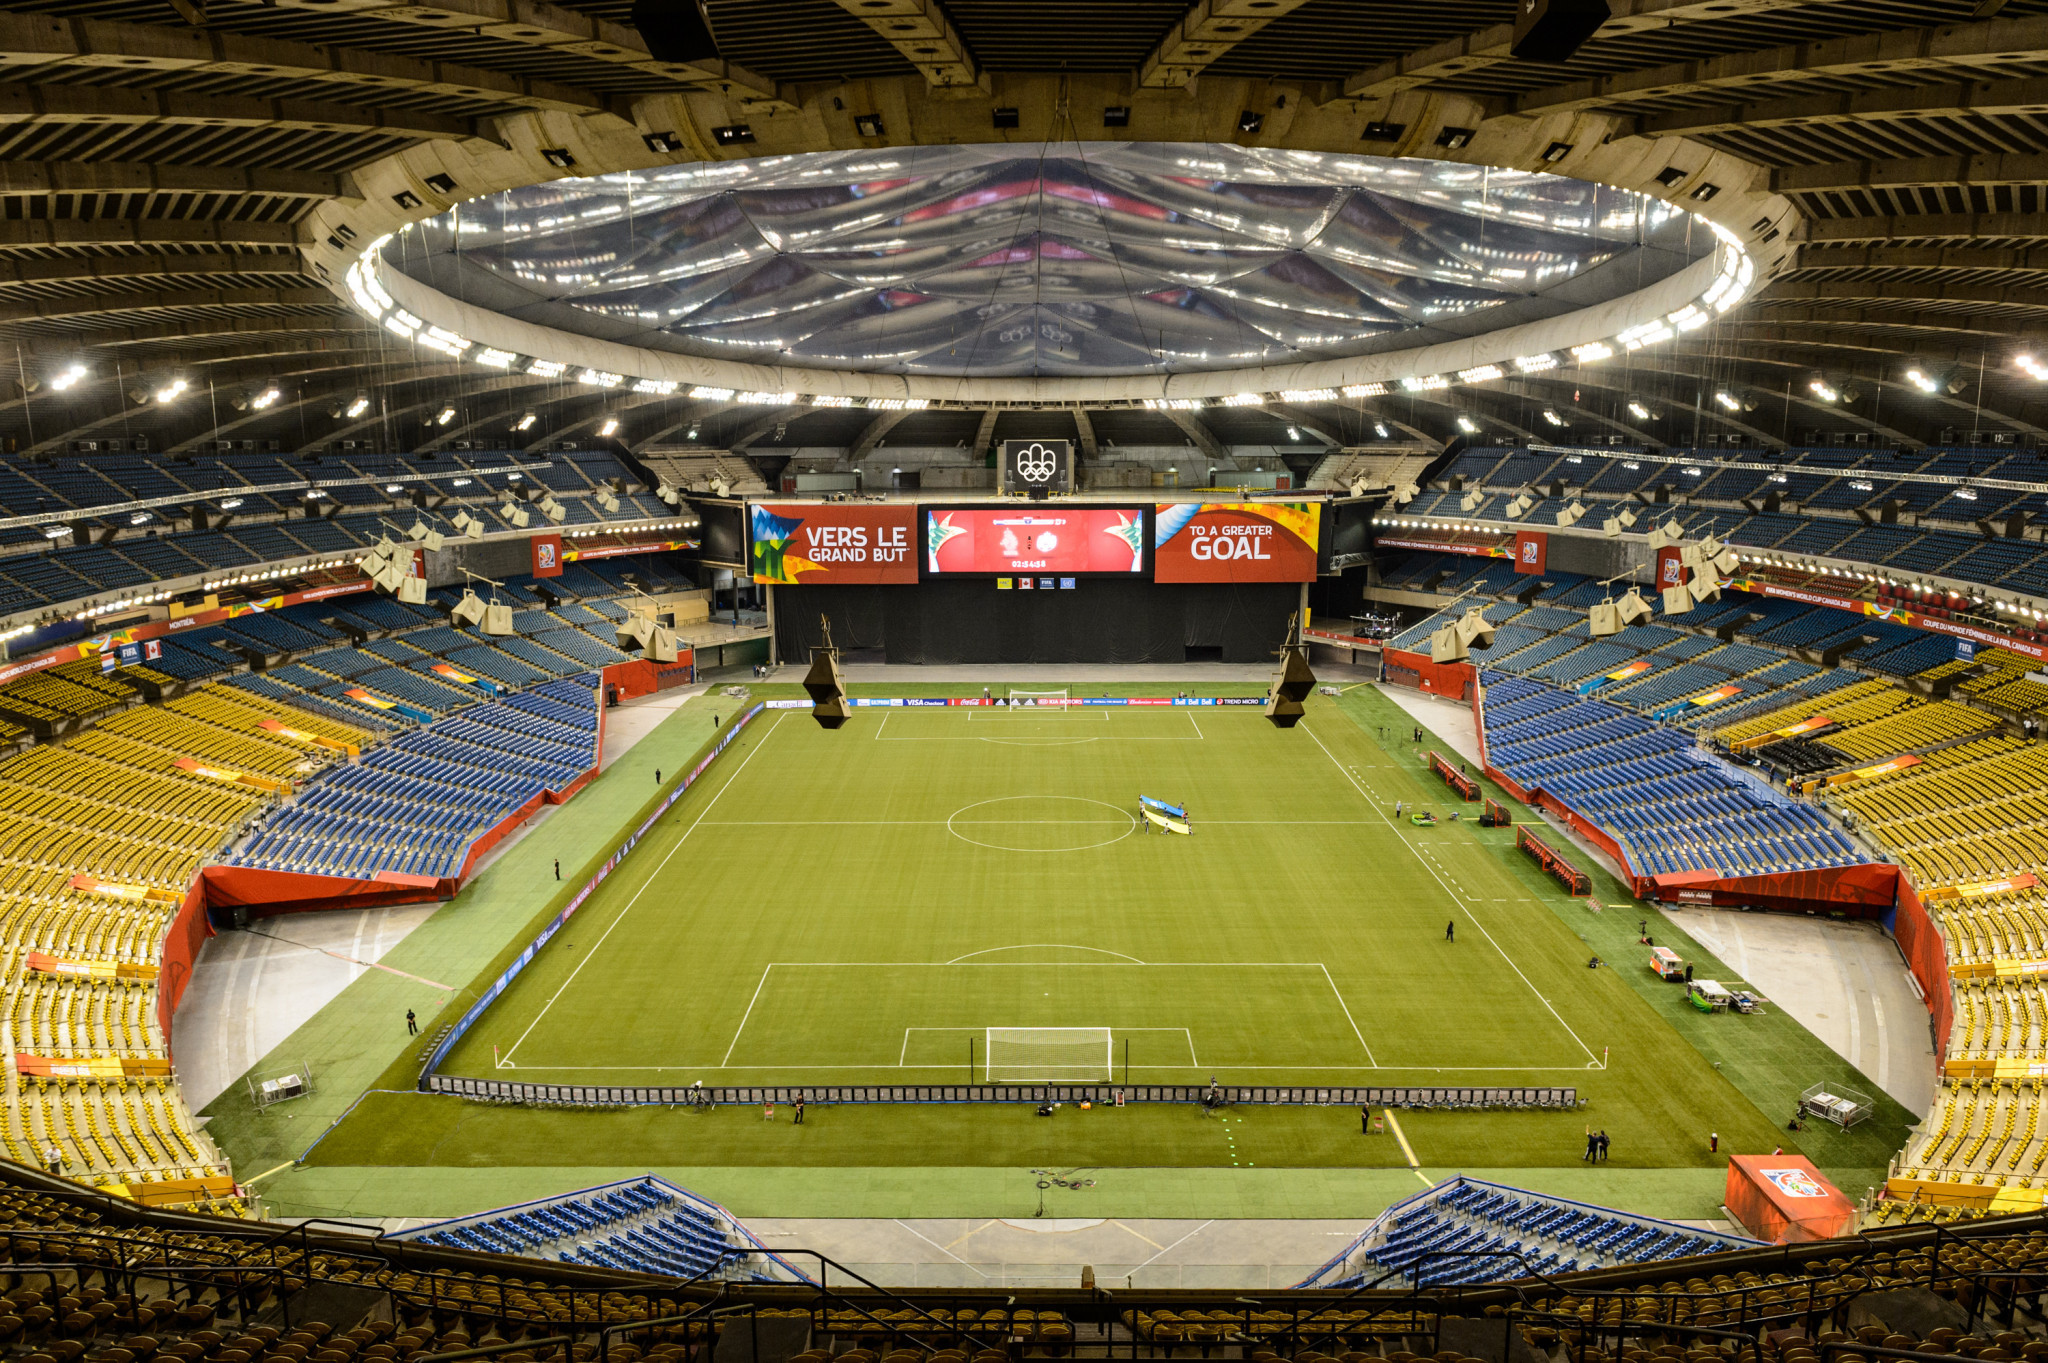 Montreal’s hopes of hosting 2026 FIFA World Cup matches suffer financial blow